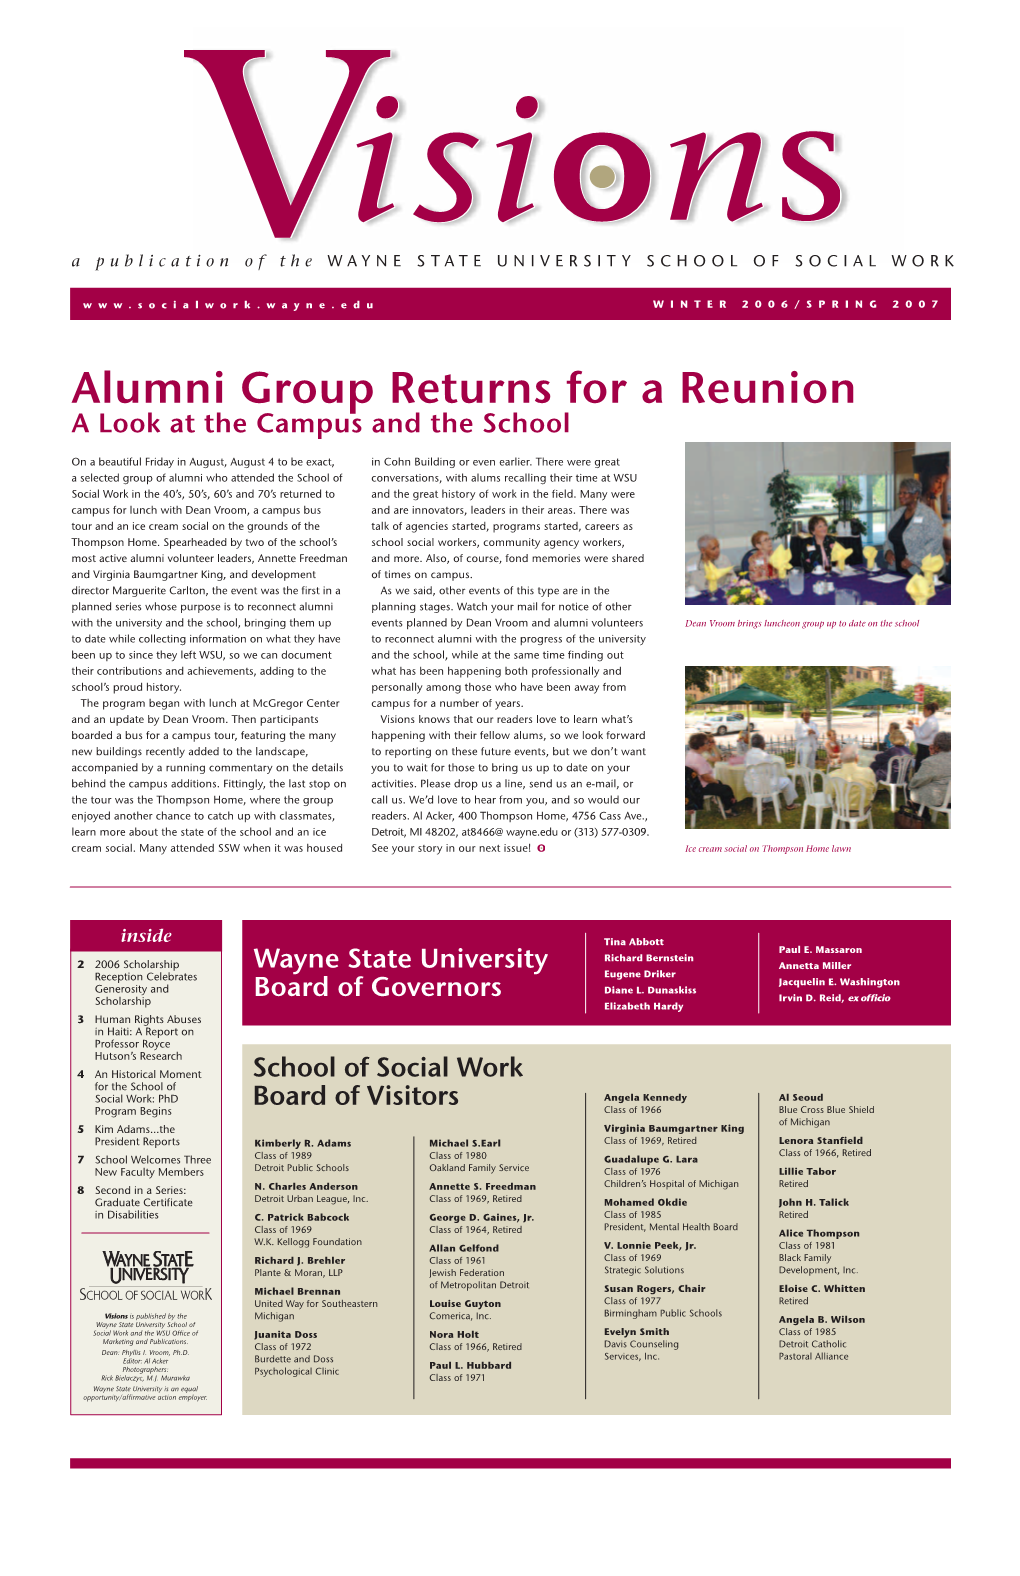 Alumni Group Returns for a Reunion a Look at the Campus and the School